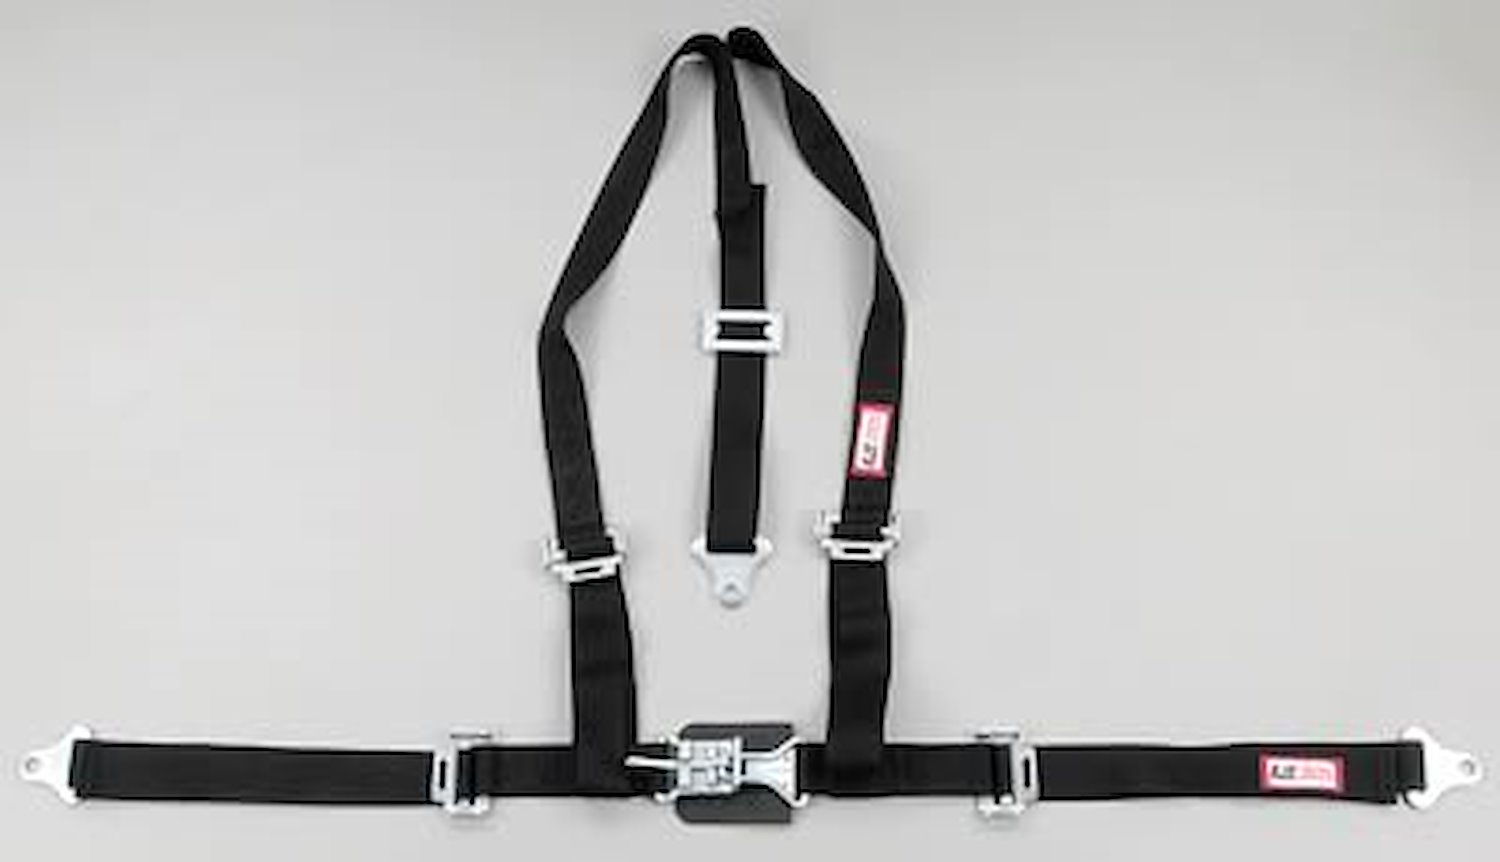 NON-SFI L&L HARNESS 3 PULL UP Lap Belt SNAP SEWN IN 2 S.H. Individual FLOOR Mount WRAP/SNAP HOT PINK